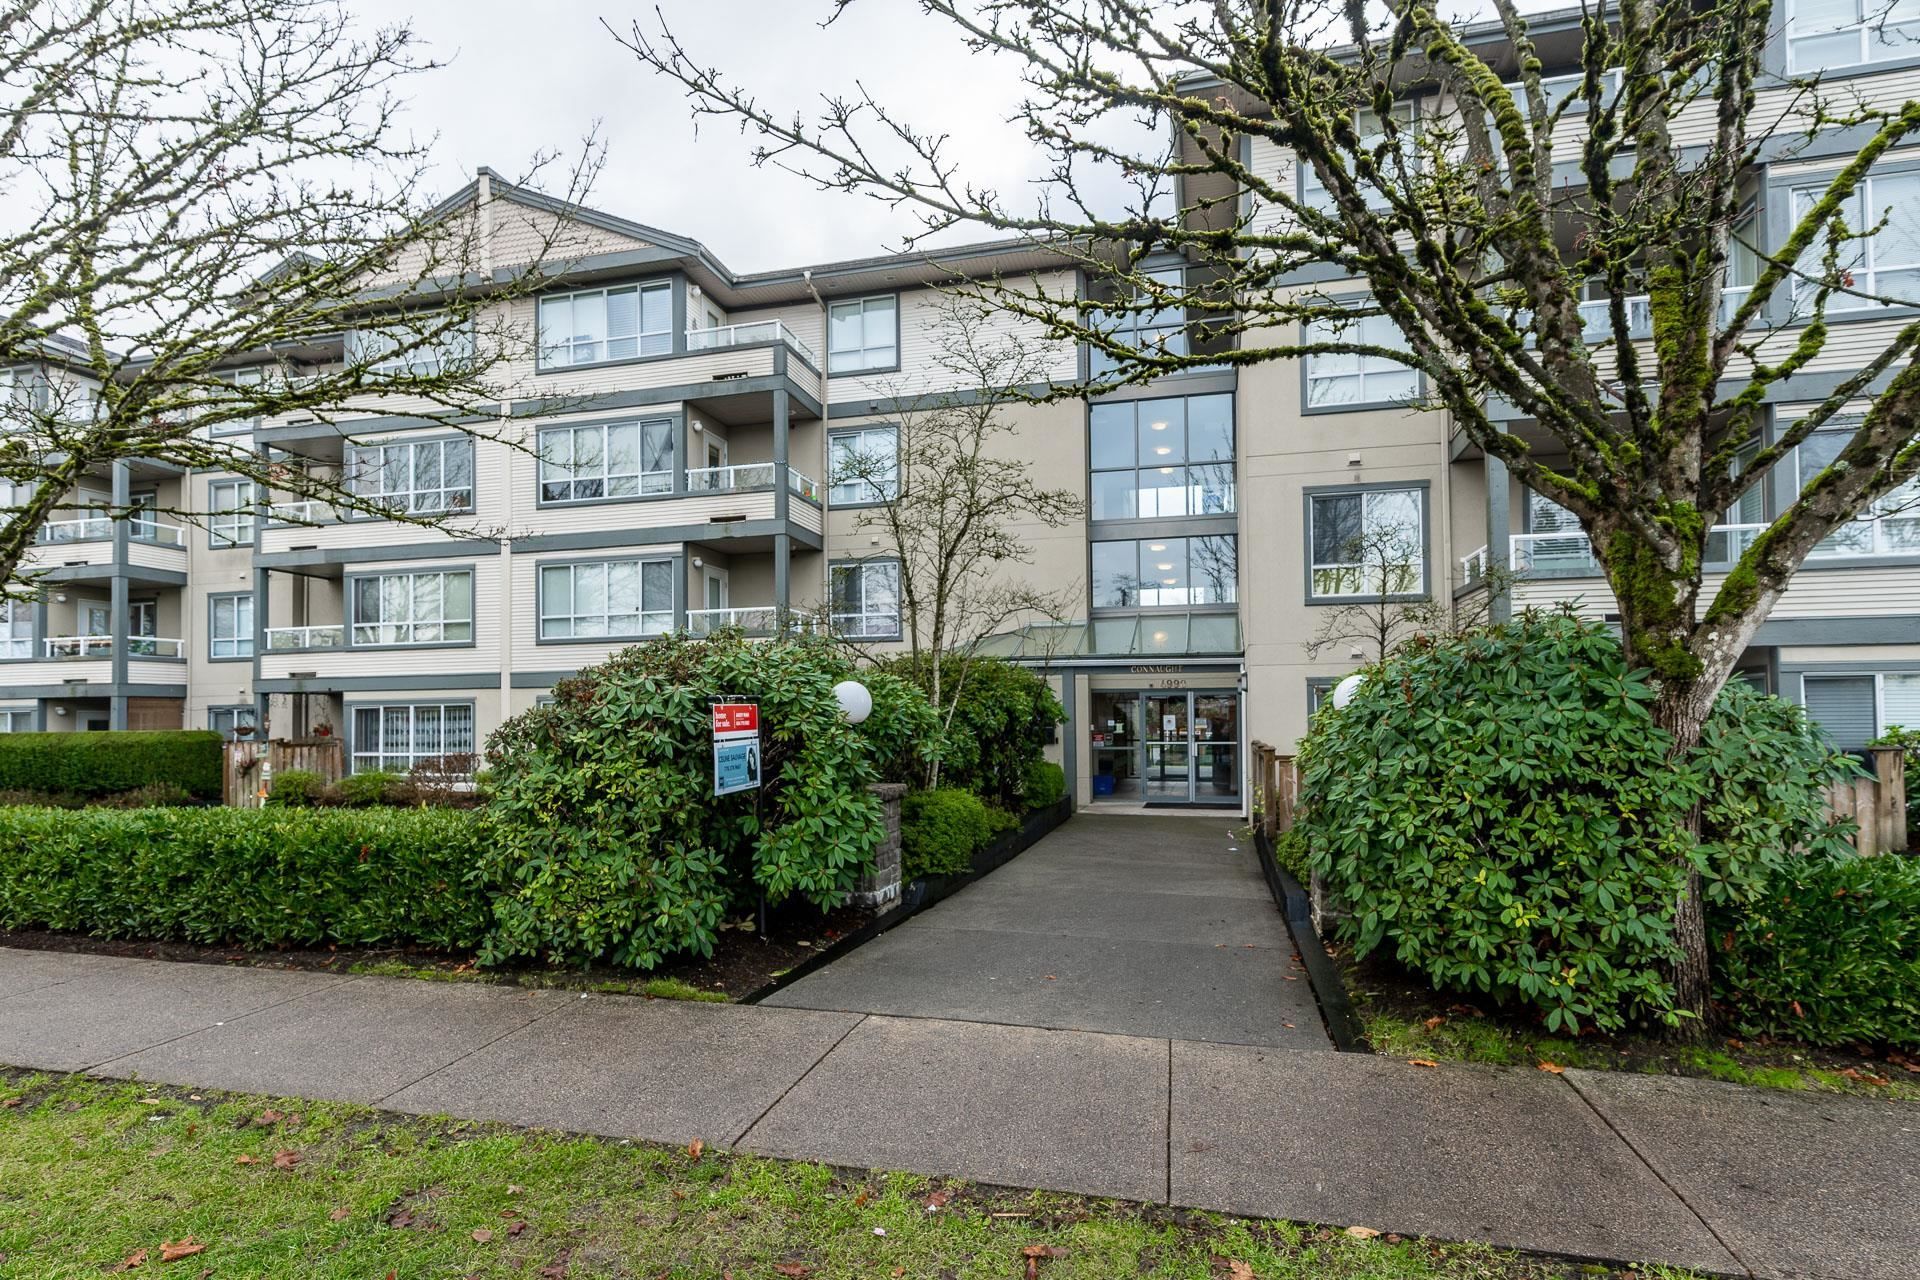 Main Photo: 308 4990 MCGEER STREET in Vancouver: Collingwood VE Condo for sale (Vancouver East)  : MLS®# R2638392